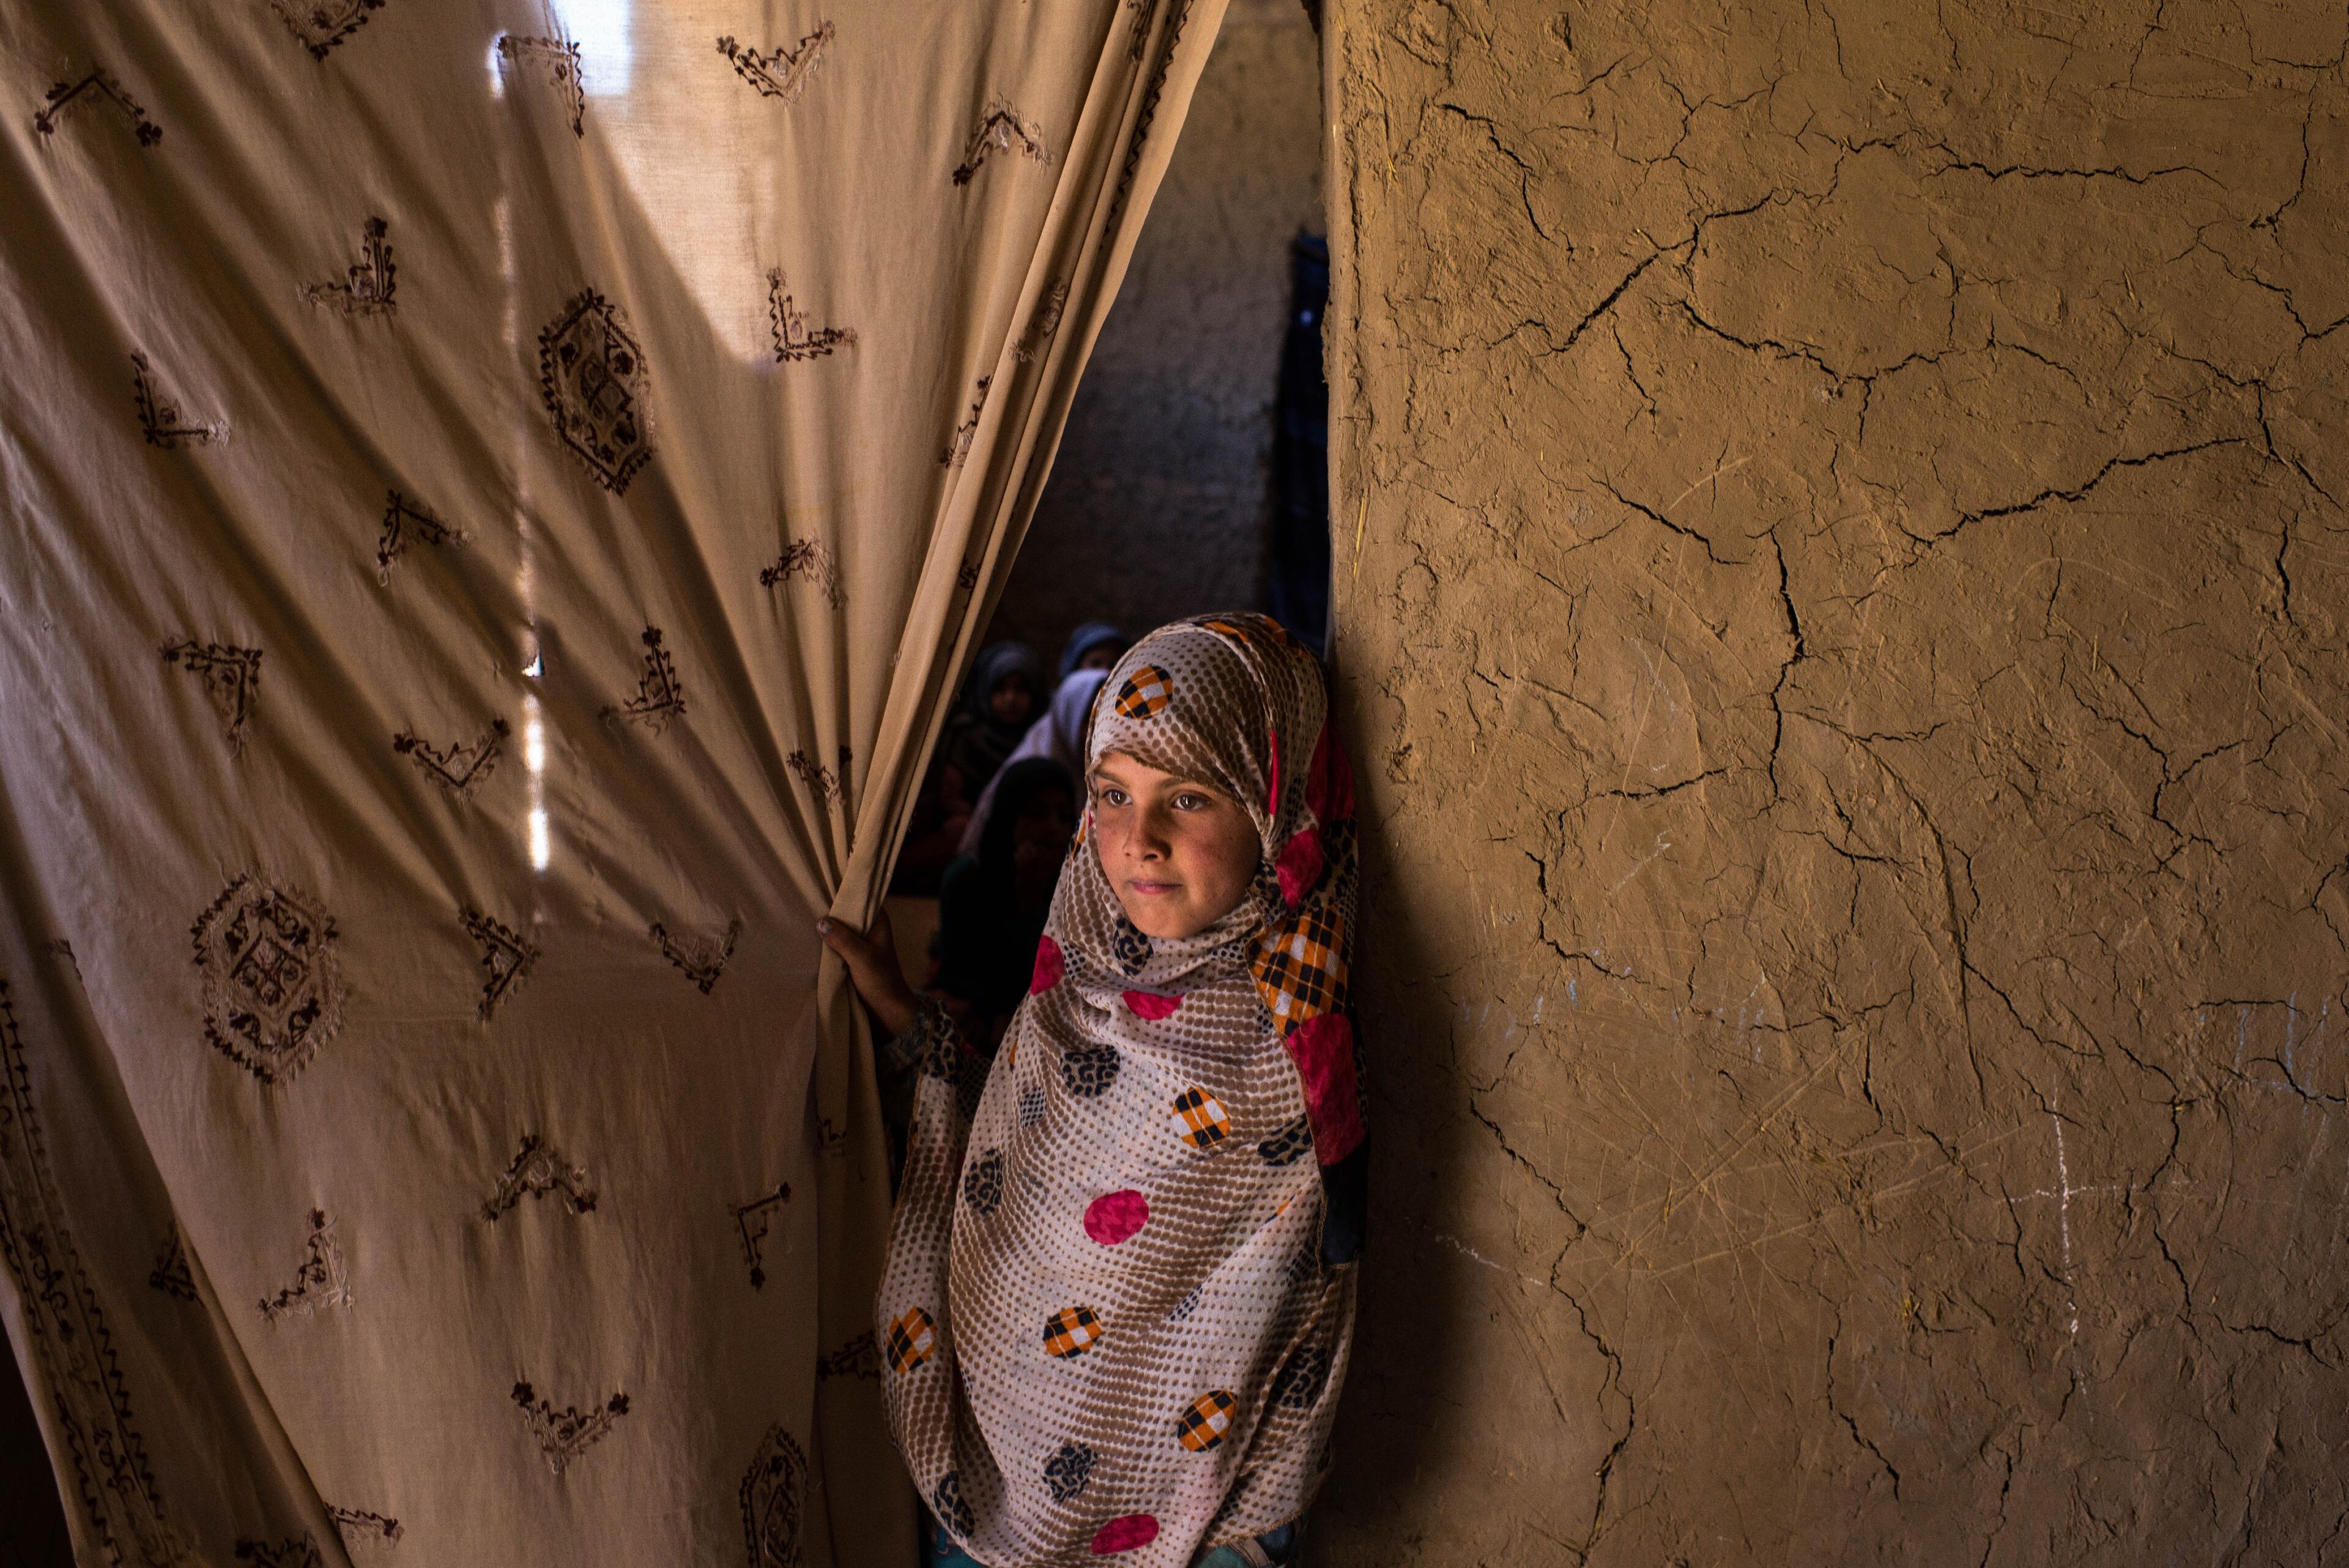 A young girl grasps a curtain hanging in a doorway in Afghanistan, looking out as she leans agains the wall.